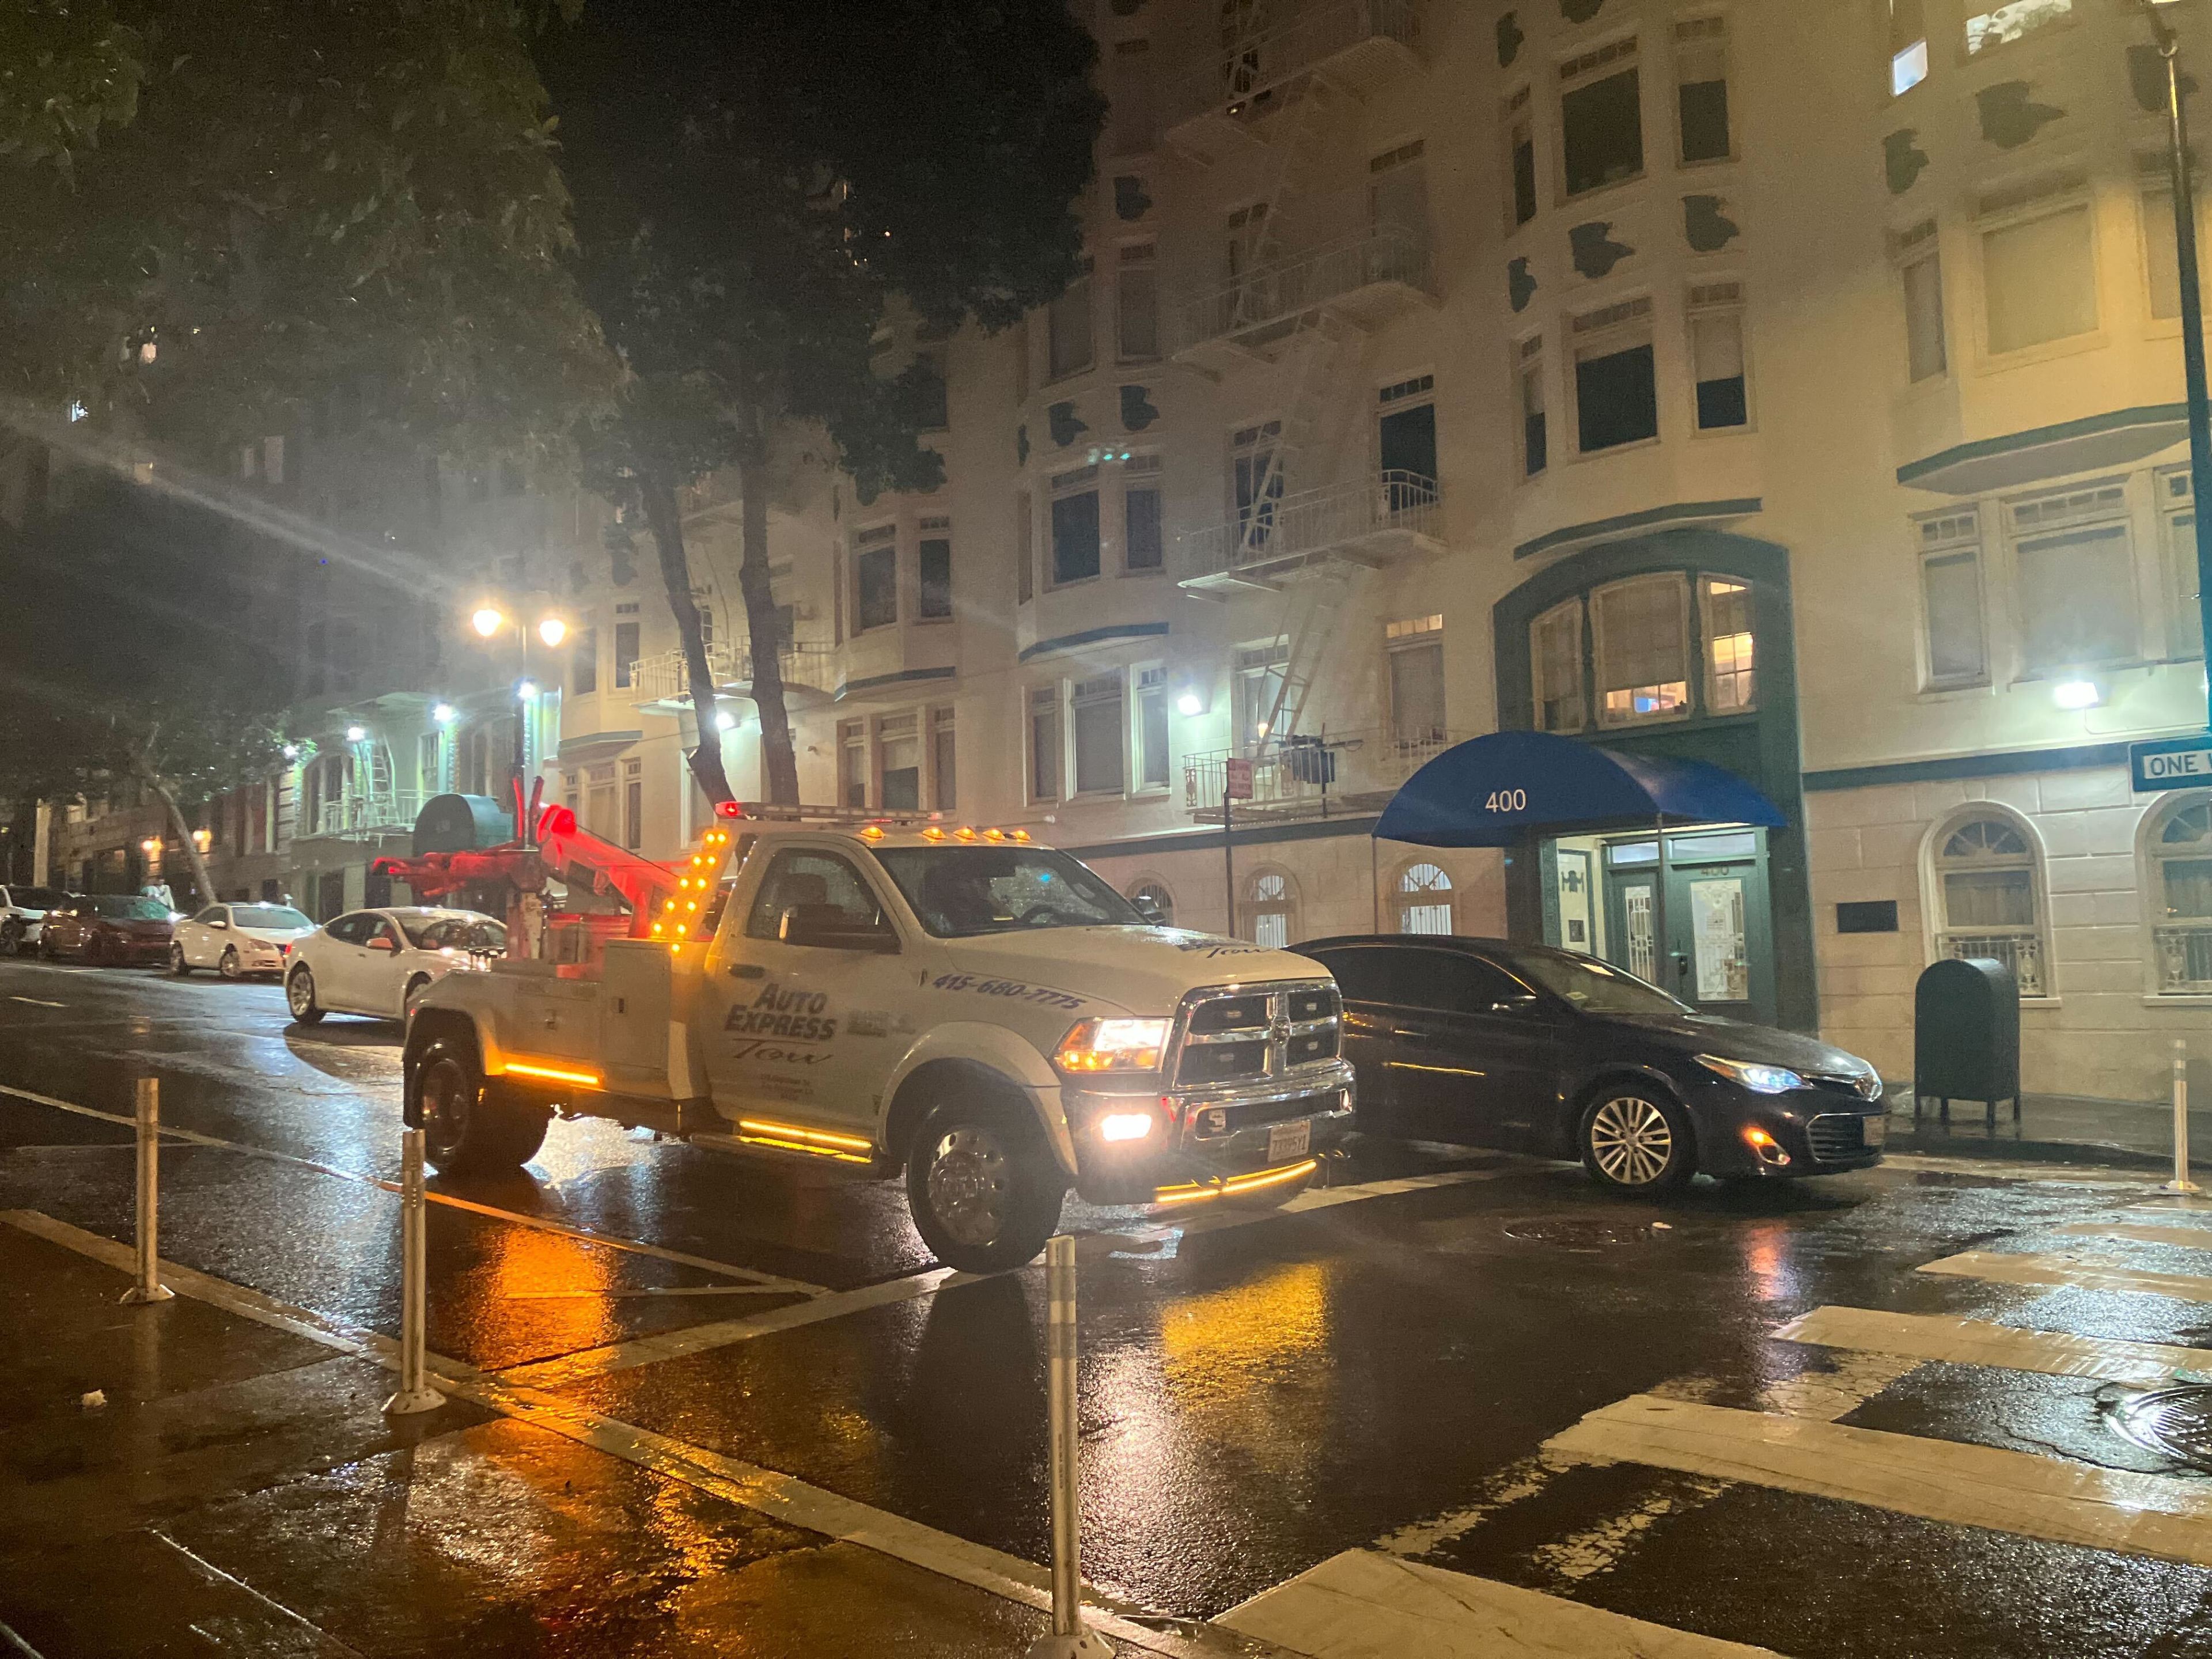 A tow truck with flashing lights is parked on a wet street at night, in front of apartment buildings.